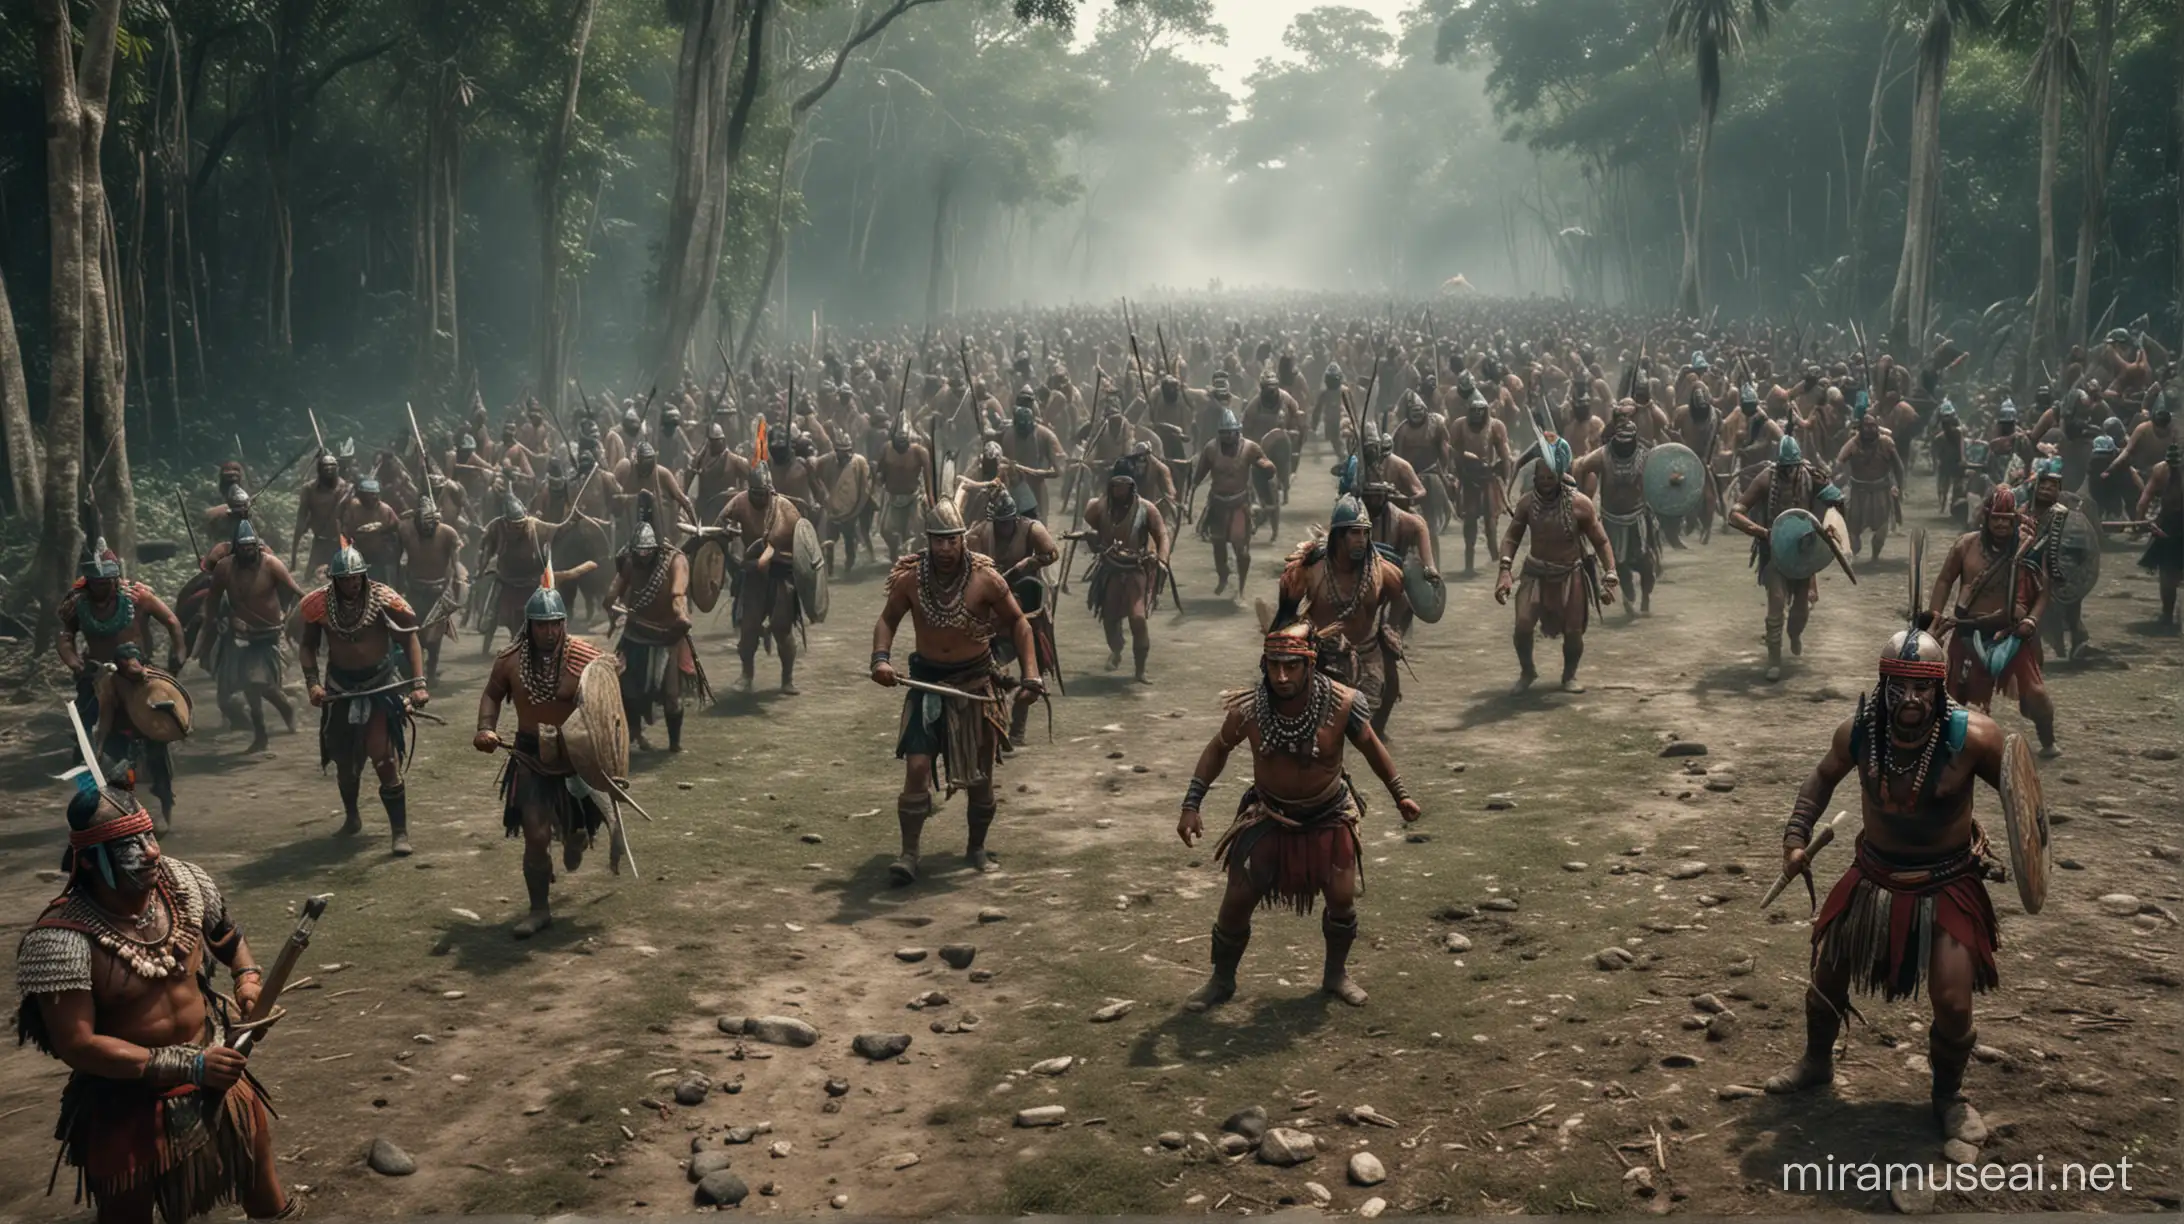  image of battles for territory between Mayan tribes, 700 years ago. with a 6k resolution.